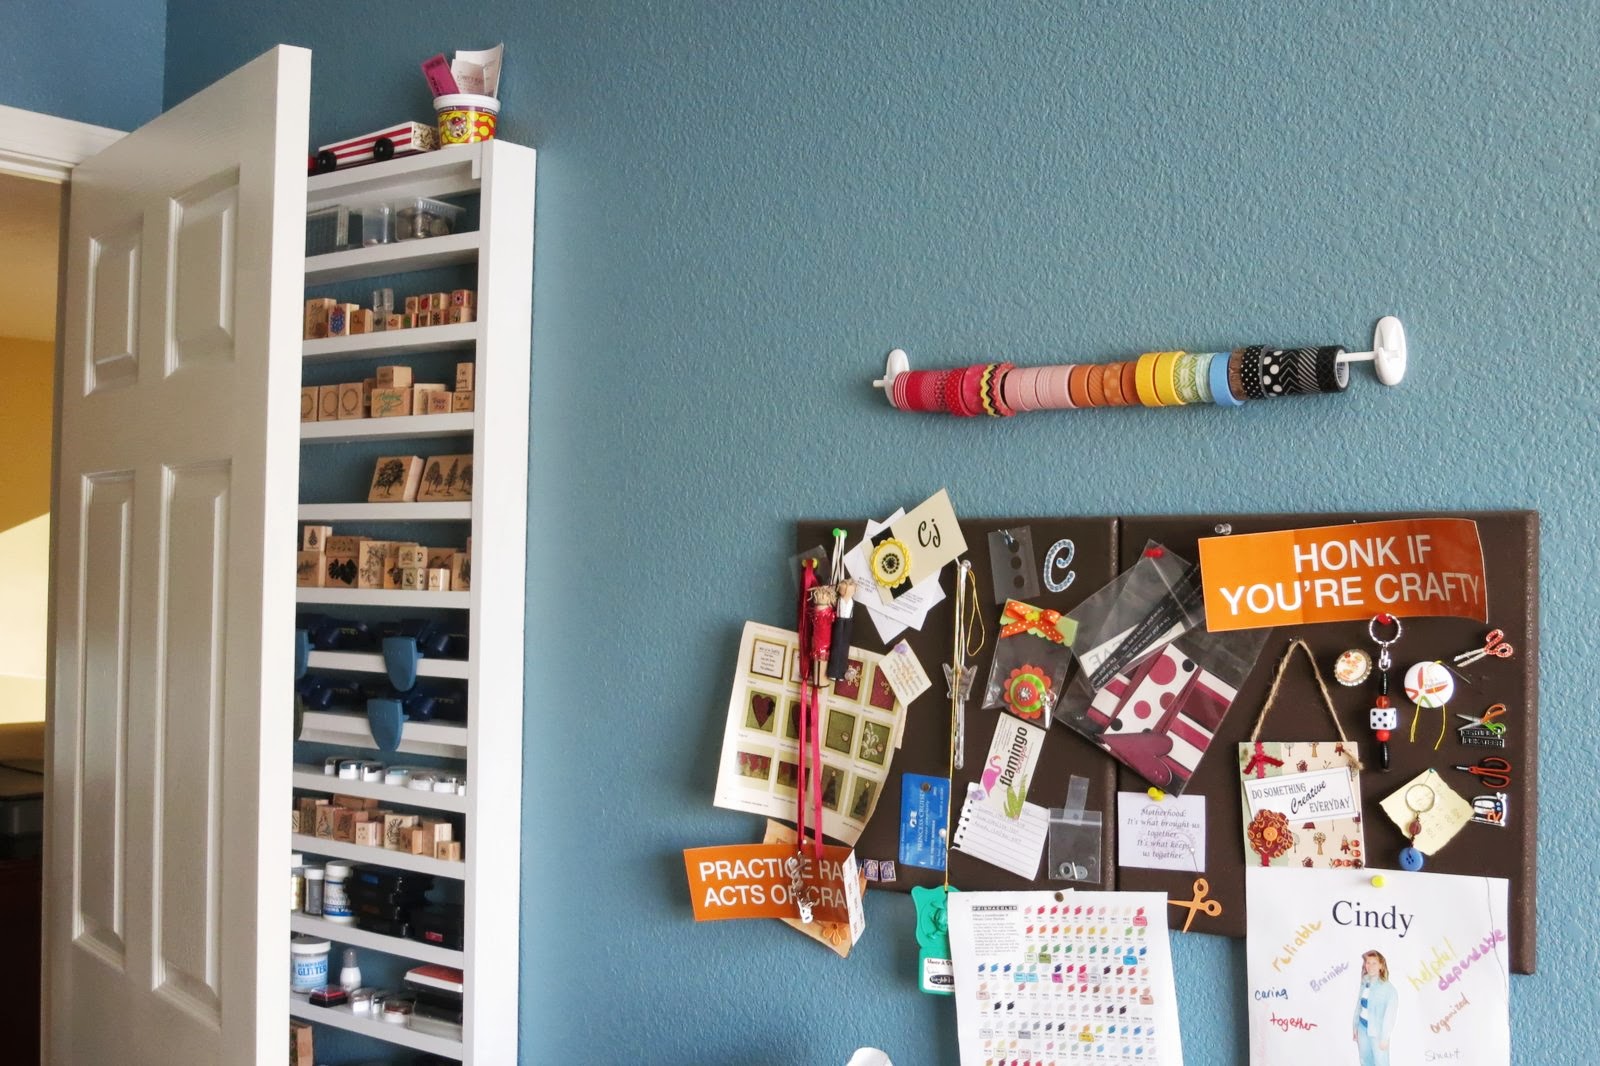 Washi Tape Storage Ideas (13 Clever Ways To Store Your Washi Rolls)